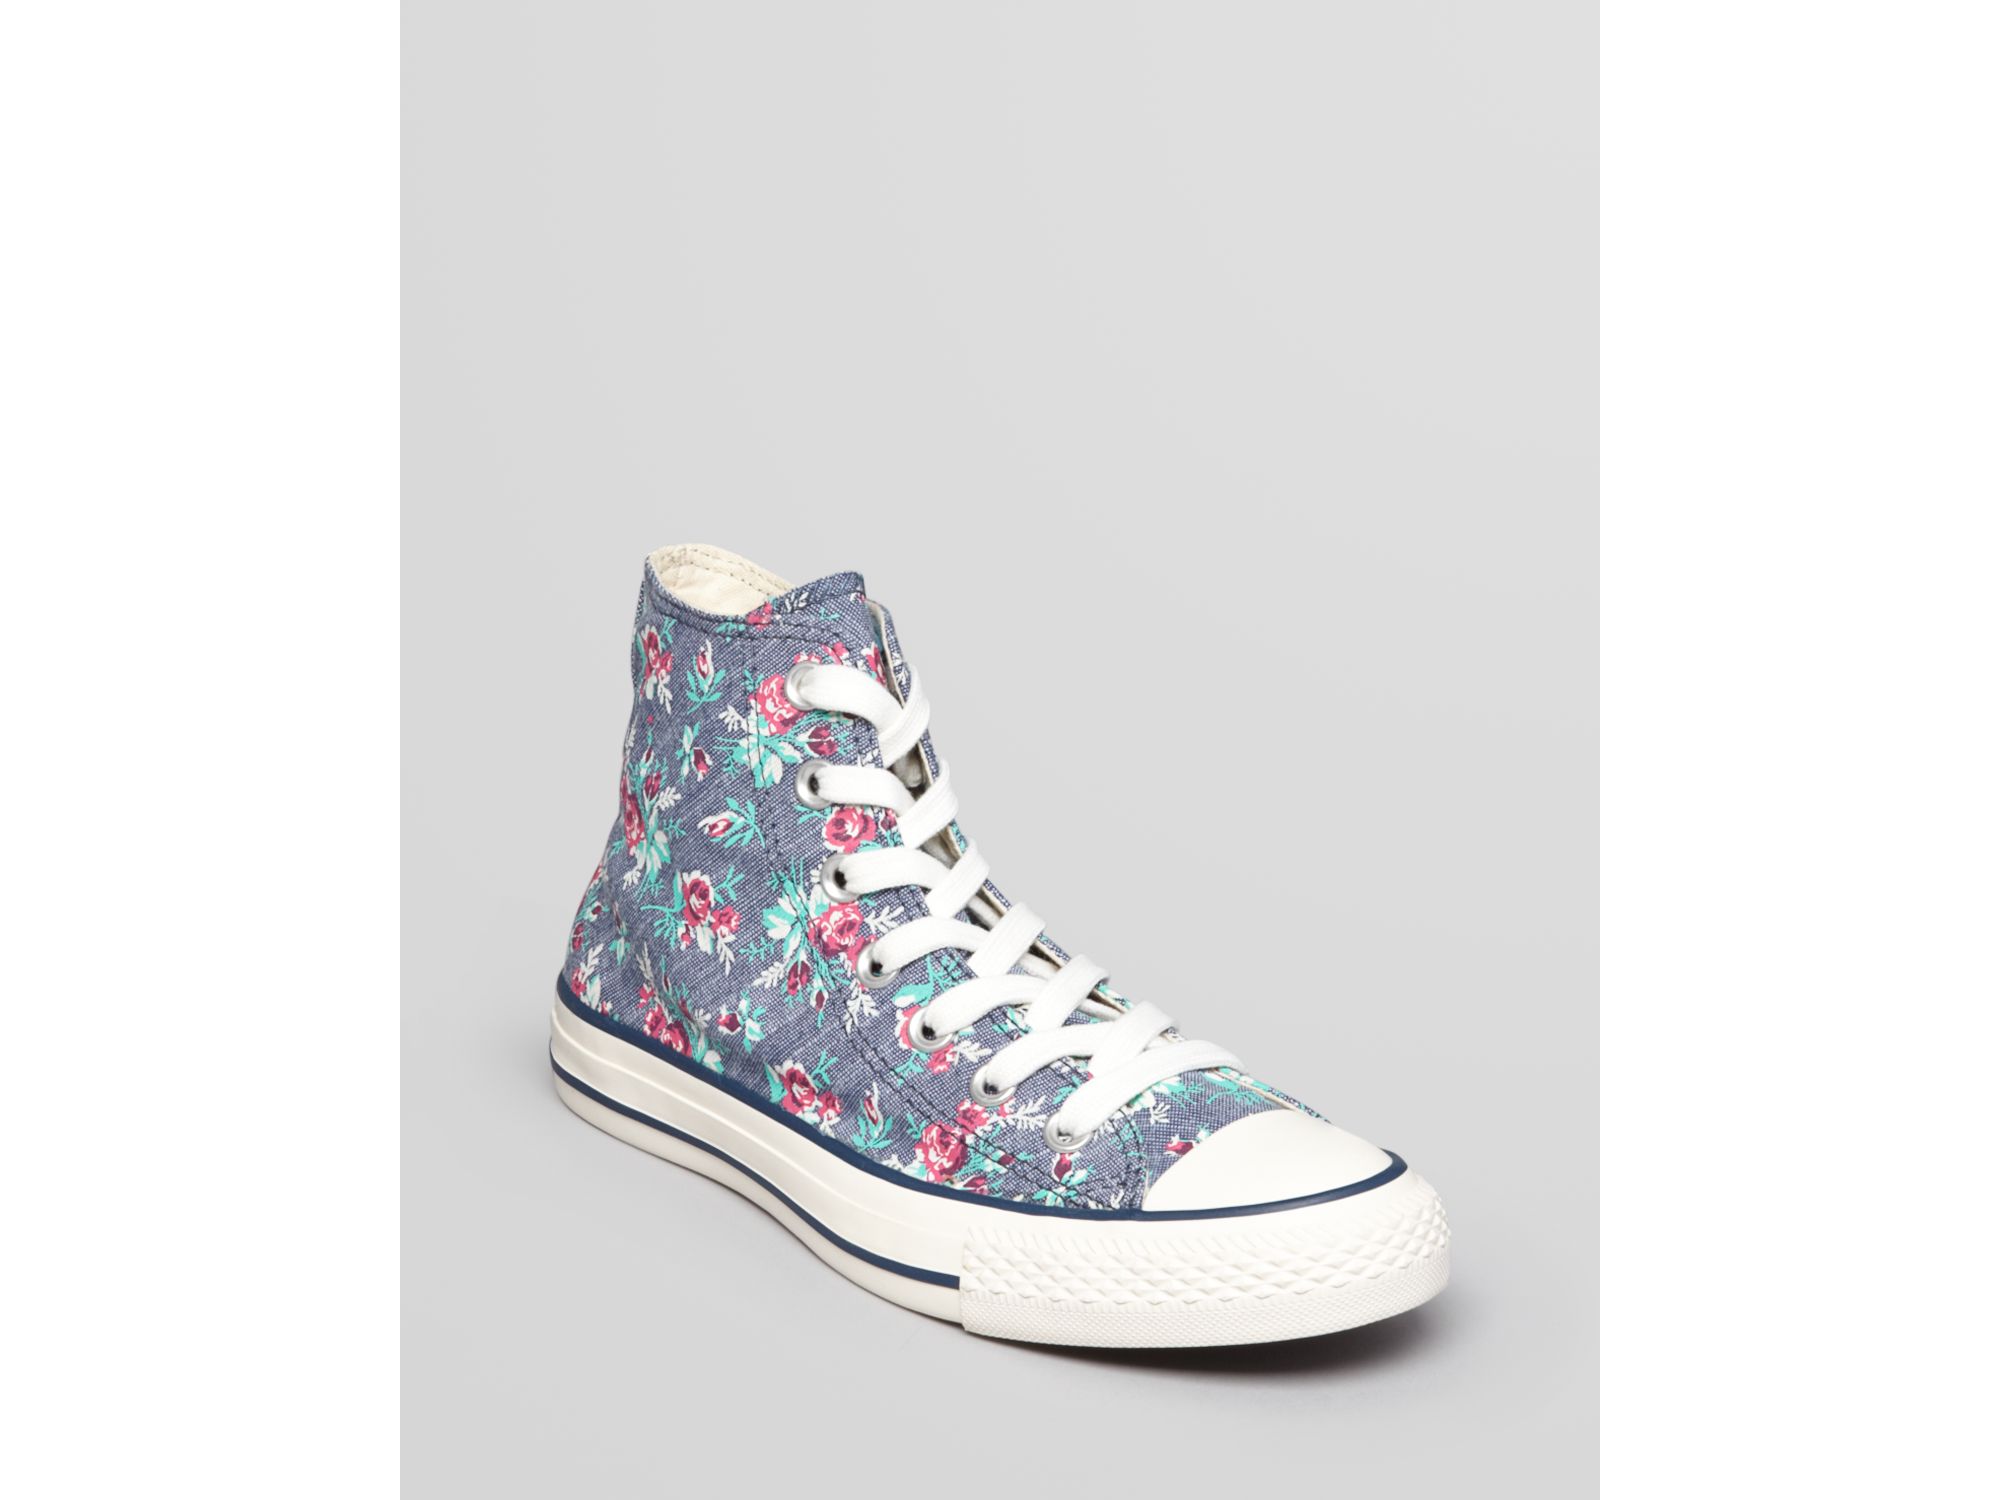 patterned converse shoes